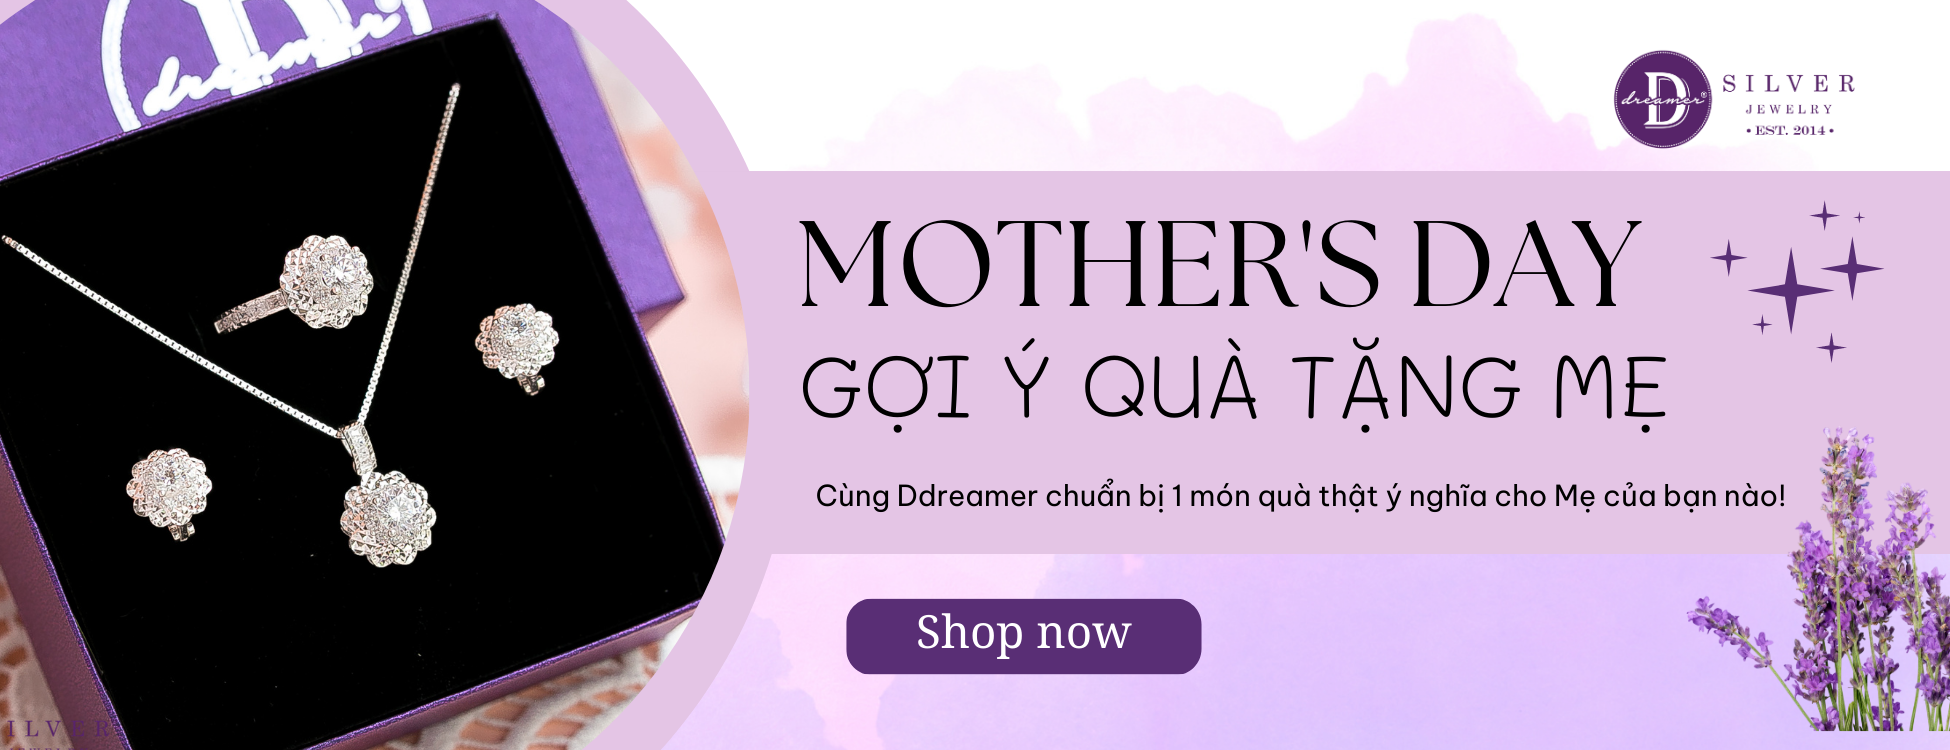 Mother's Day Collection - Trang Sức Dành Tặng Mẹ - Jewelry For Mom